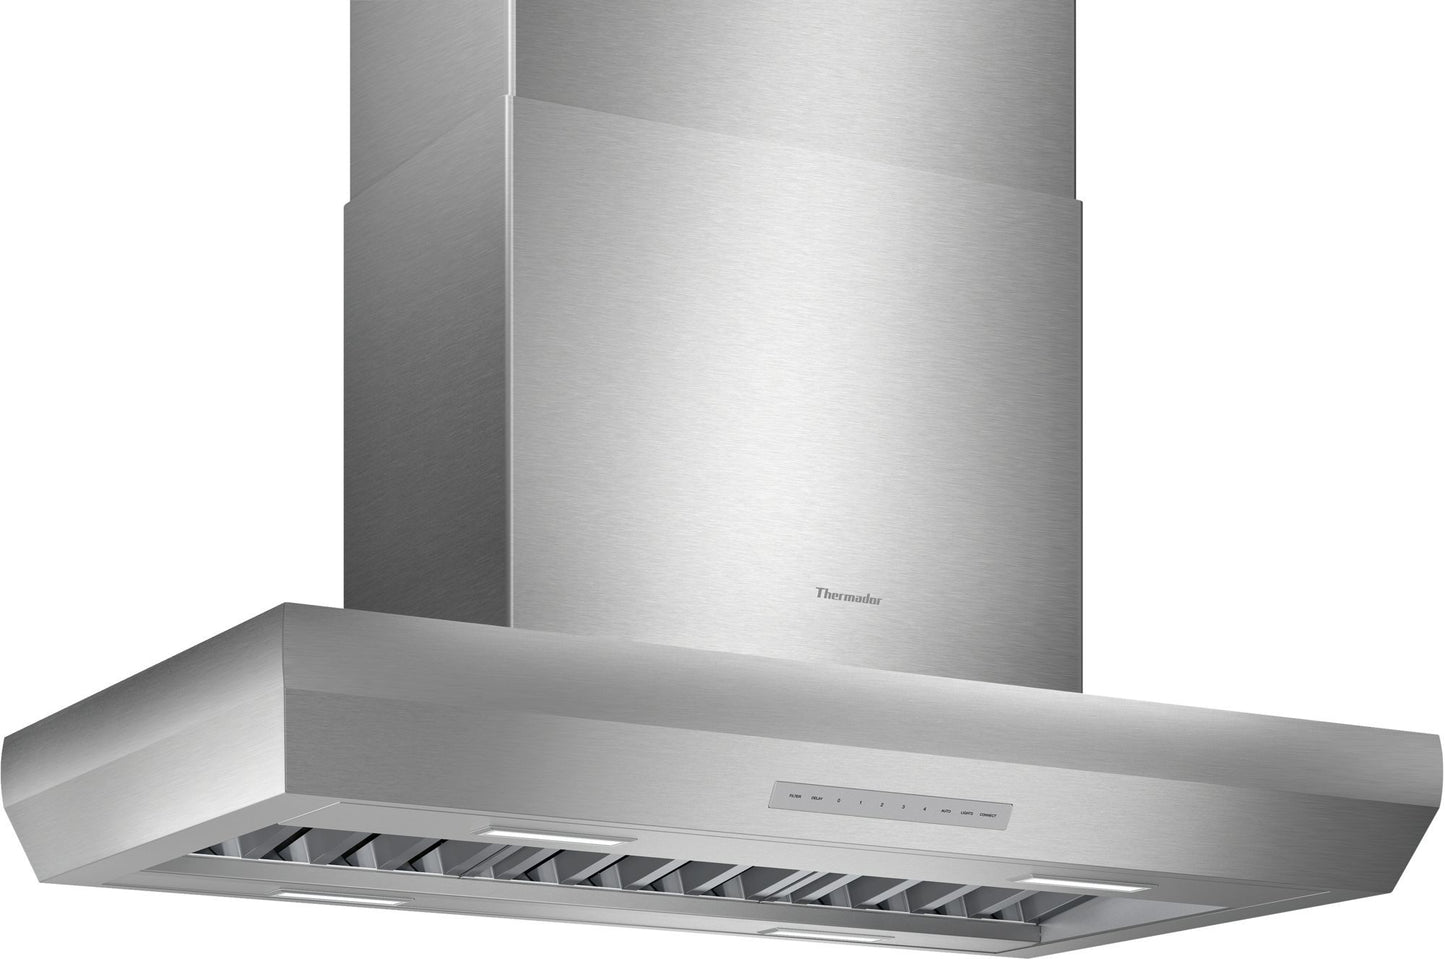 Thermador Professional  HPIN42WS 42 Inch Island Mount Smart Range Hood 4-Speed, Blower Sold Separately, Touch Control, LED Lighting, Baffle Filter, and Powerfully Quiet System, 777141